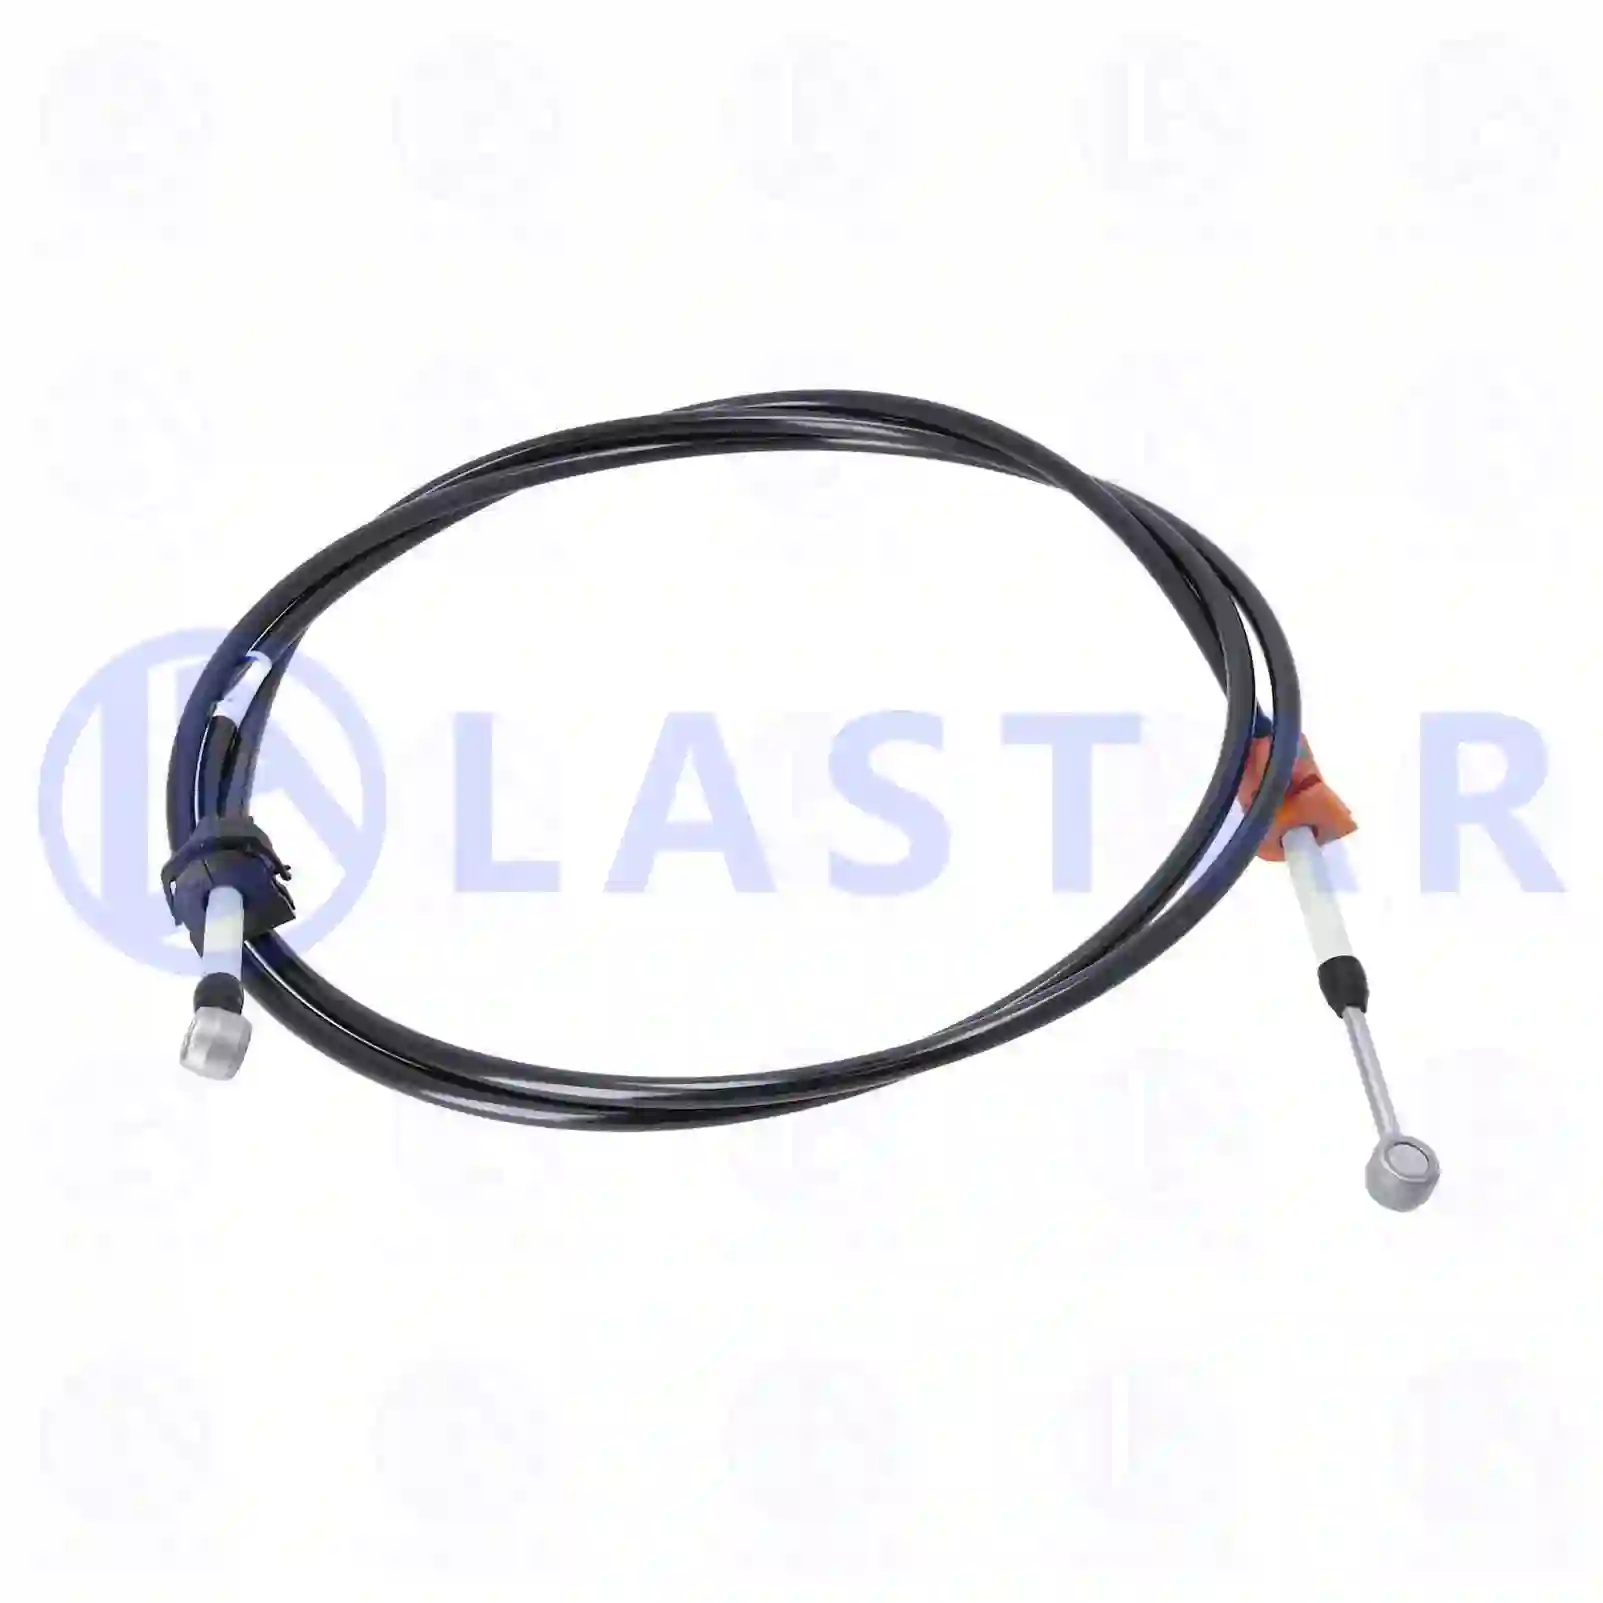 Control cable, switching, 77732445, 20545954, 20702954, 21002854, 21789670 ||  77732445 Lastar Spare Part | Truck Spare Parts, Auotomotive Spare Parts Control cable, switching, 77732445, 20545954, 20702954, 21002854, 21789670 ||  77732445 Lastar Spare Part | Truck Spare Parts, Auotomotive Spare Parts